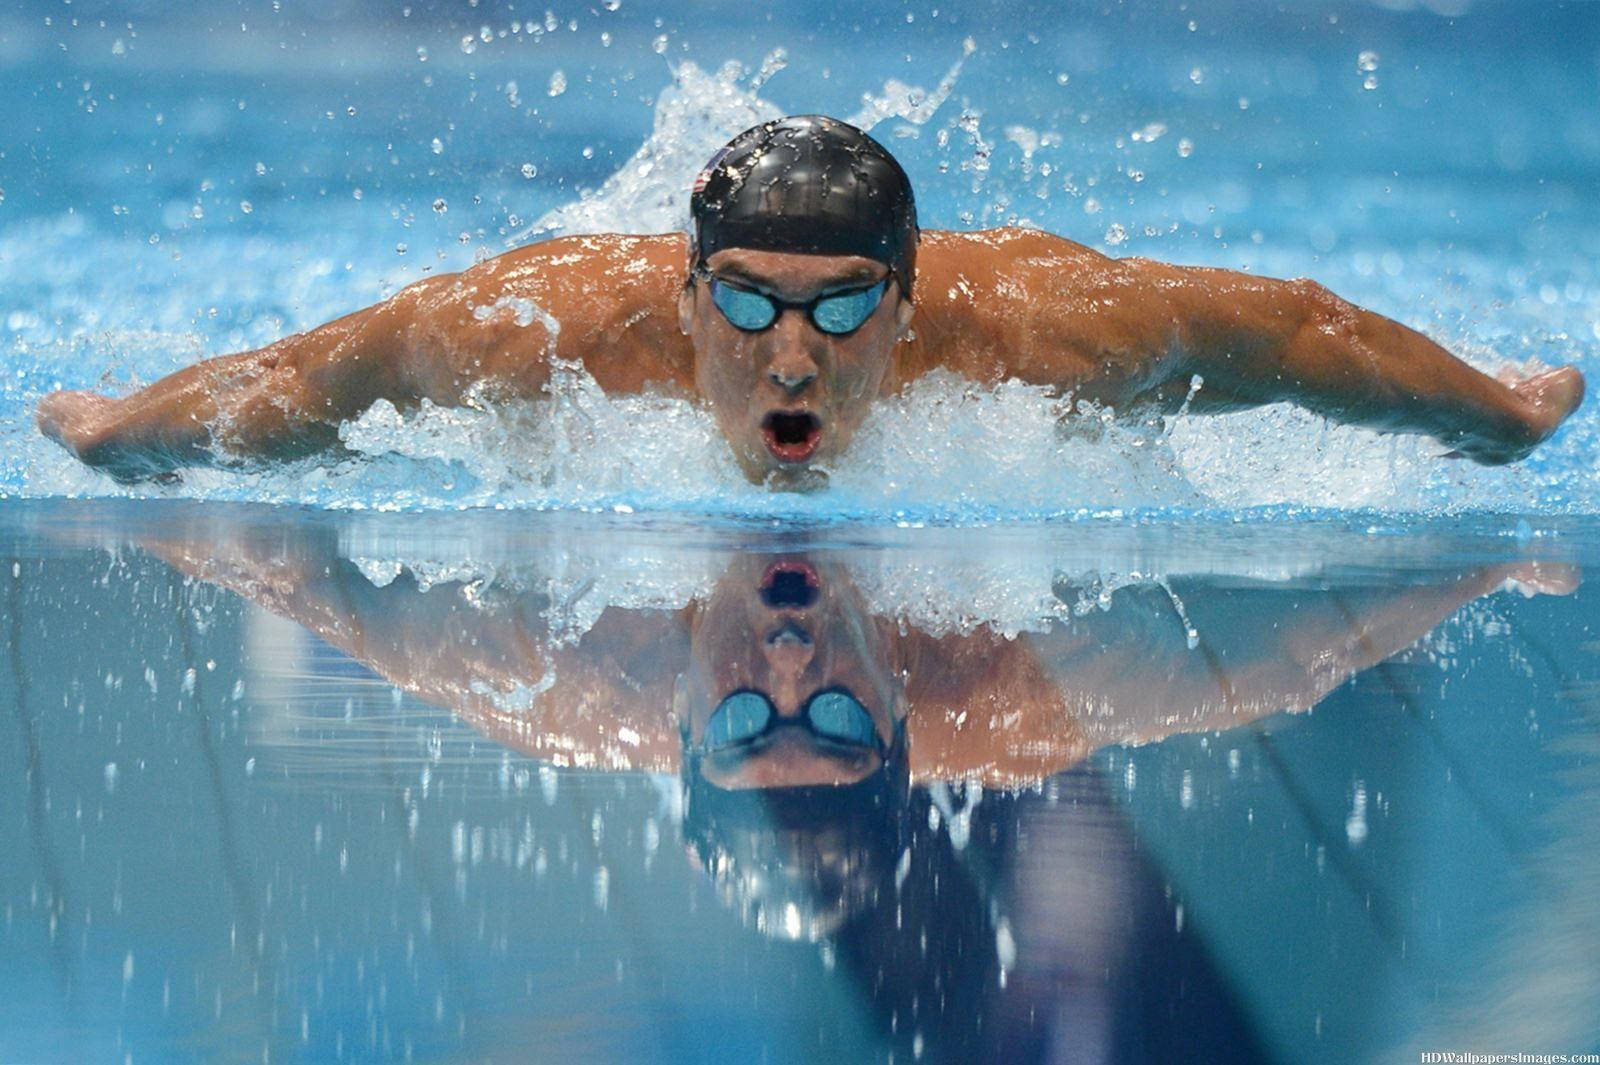 Michael Phelps, The Olympic Legend, Performing A Dive Background